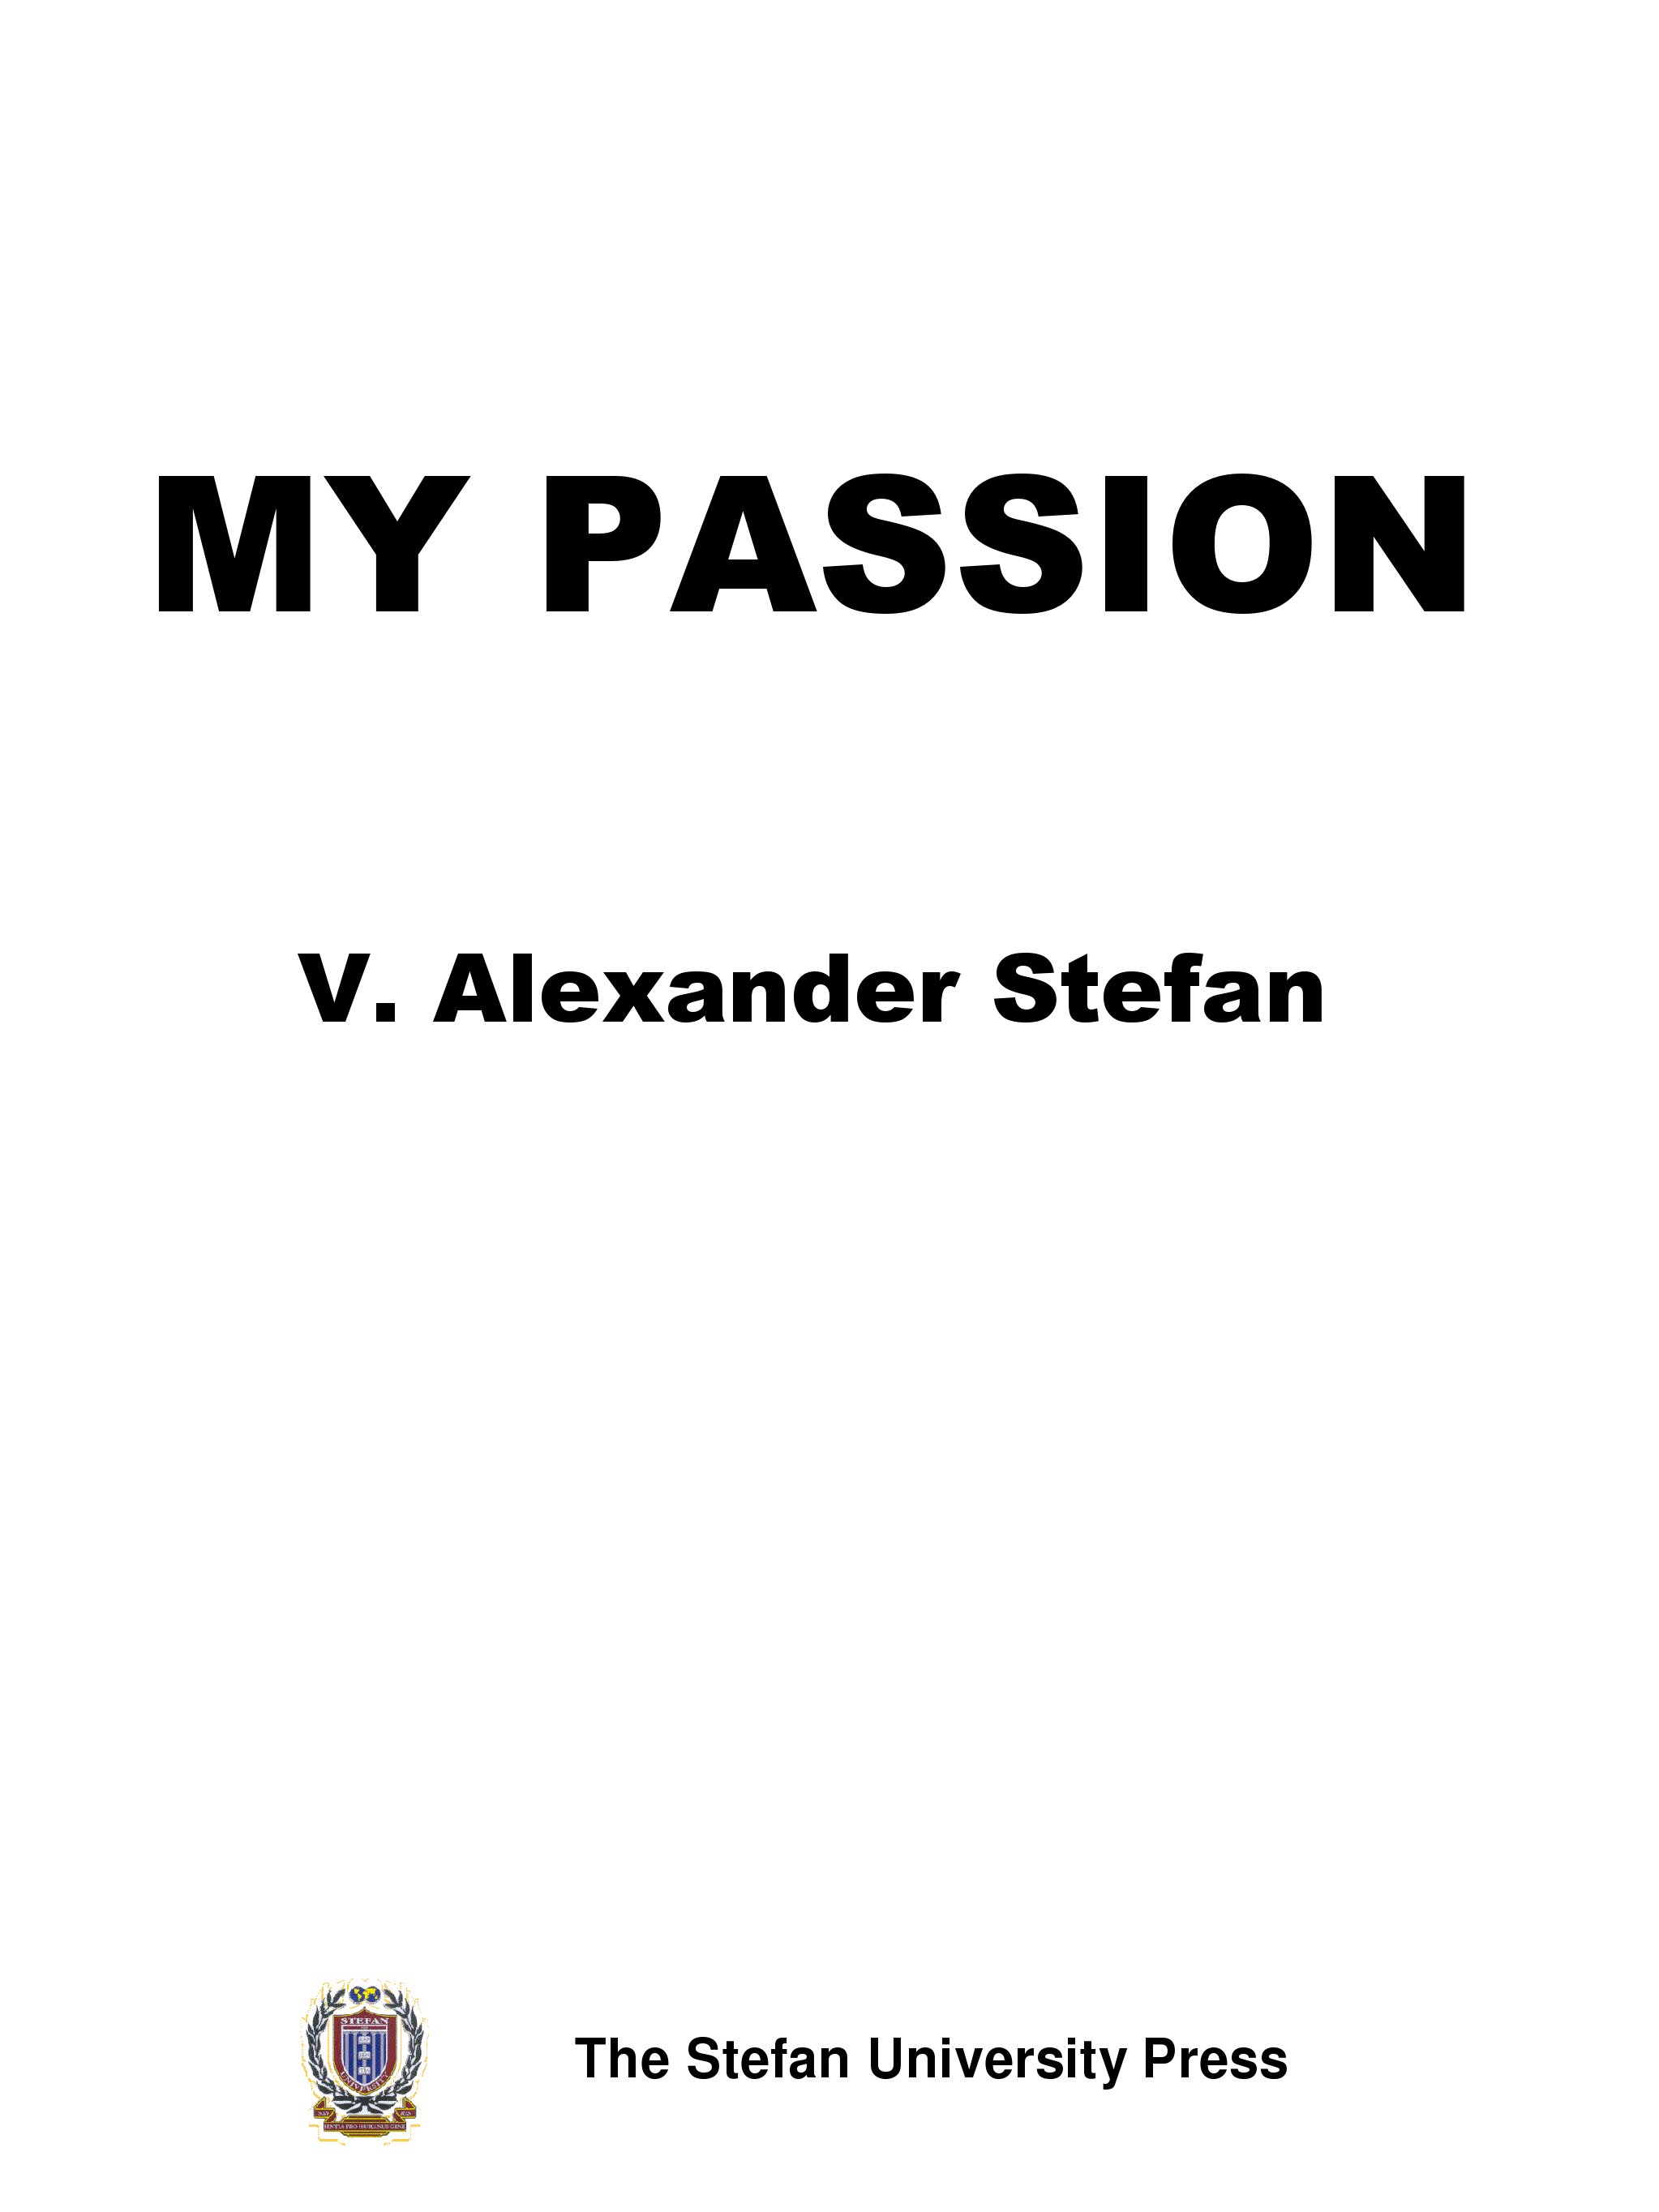 (2008) book. Autobiographical notes by V. Alexander Stefan. It covers some aspects of Stefans work regarding physics, art, and society.